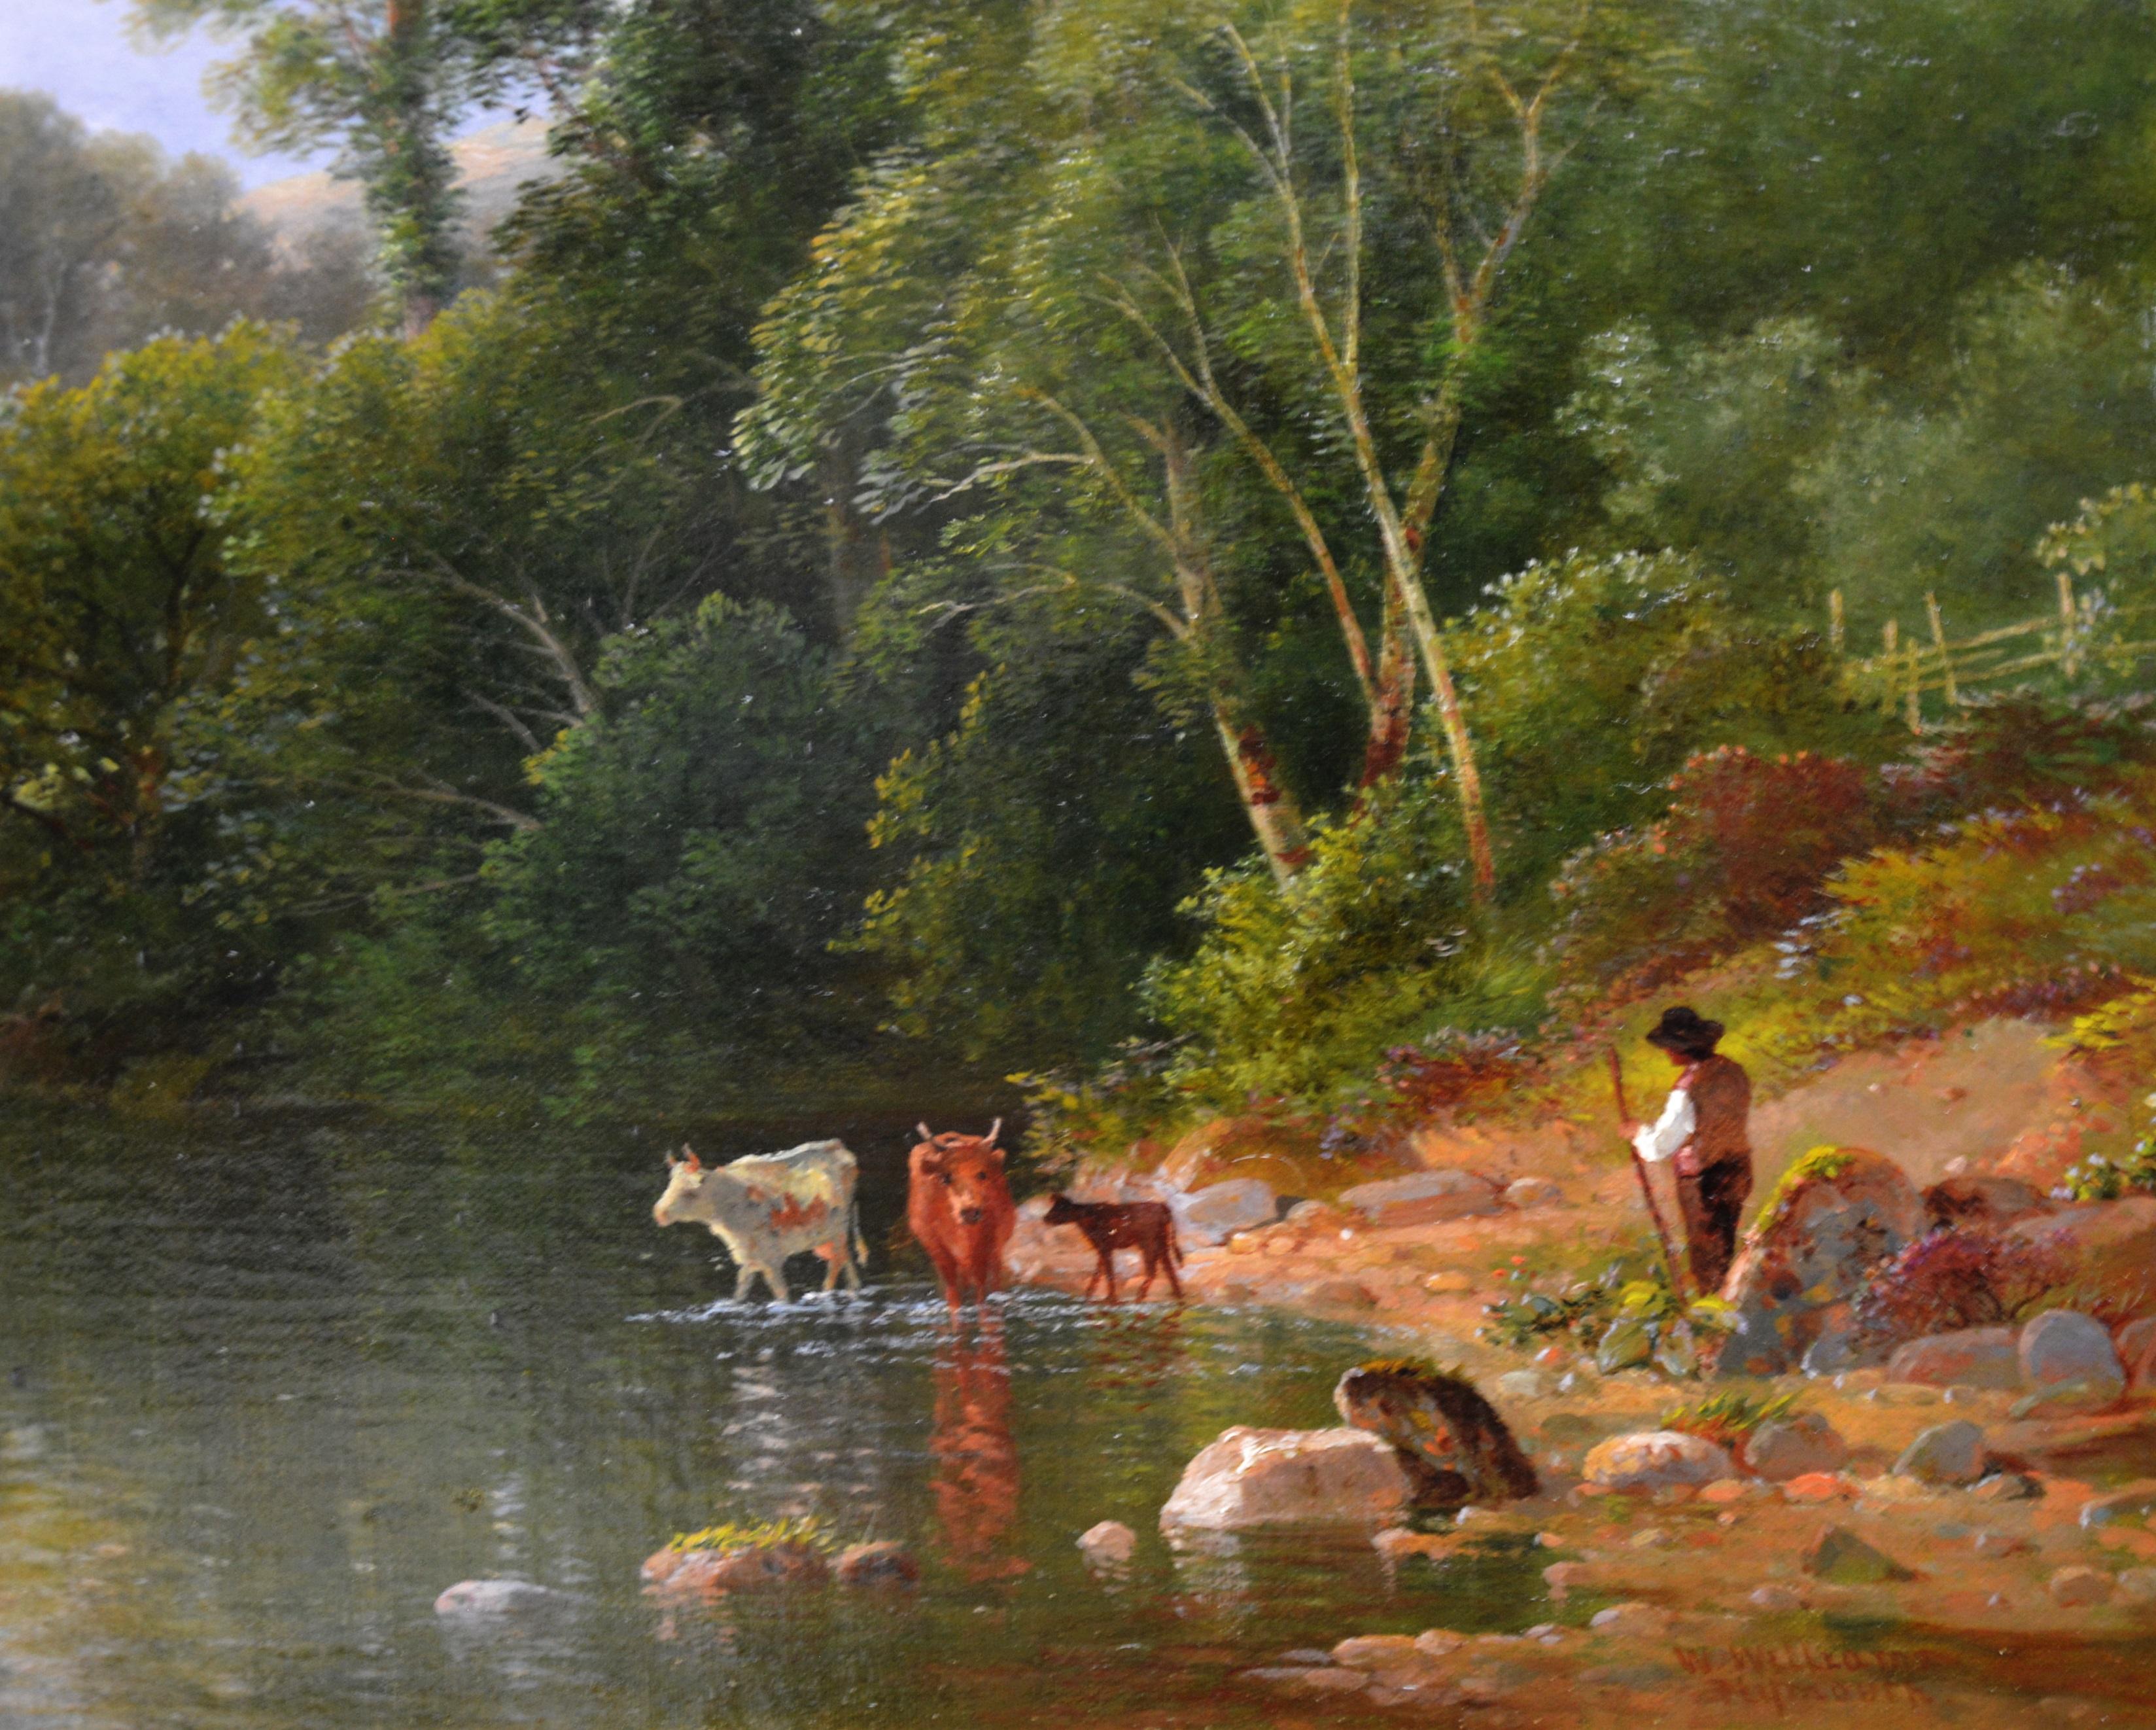 On the Teign, Devon - 19th Century English River Landscape Oil Painting - Brown Landscape Painting by William Williams of Plymouth